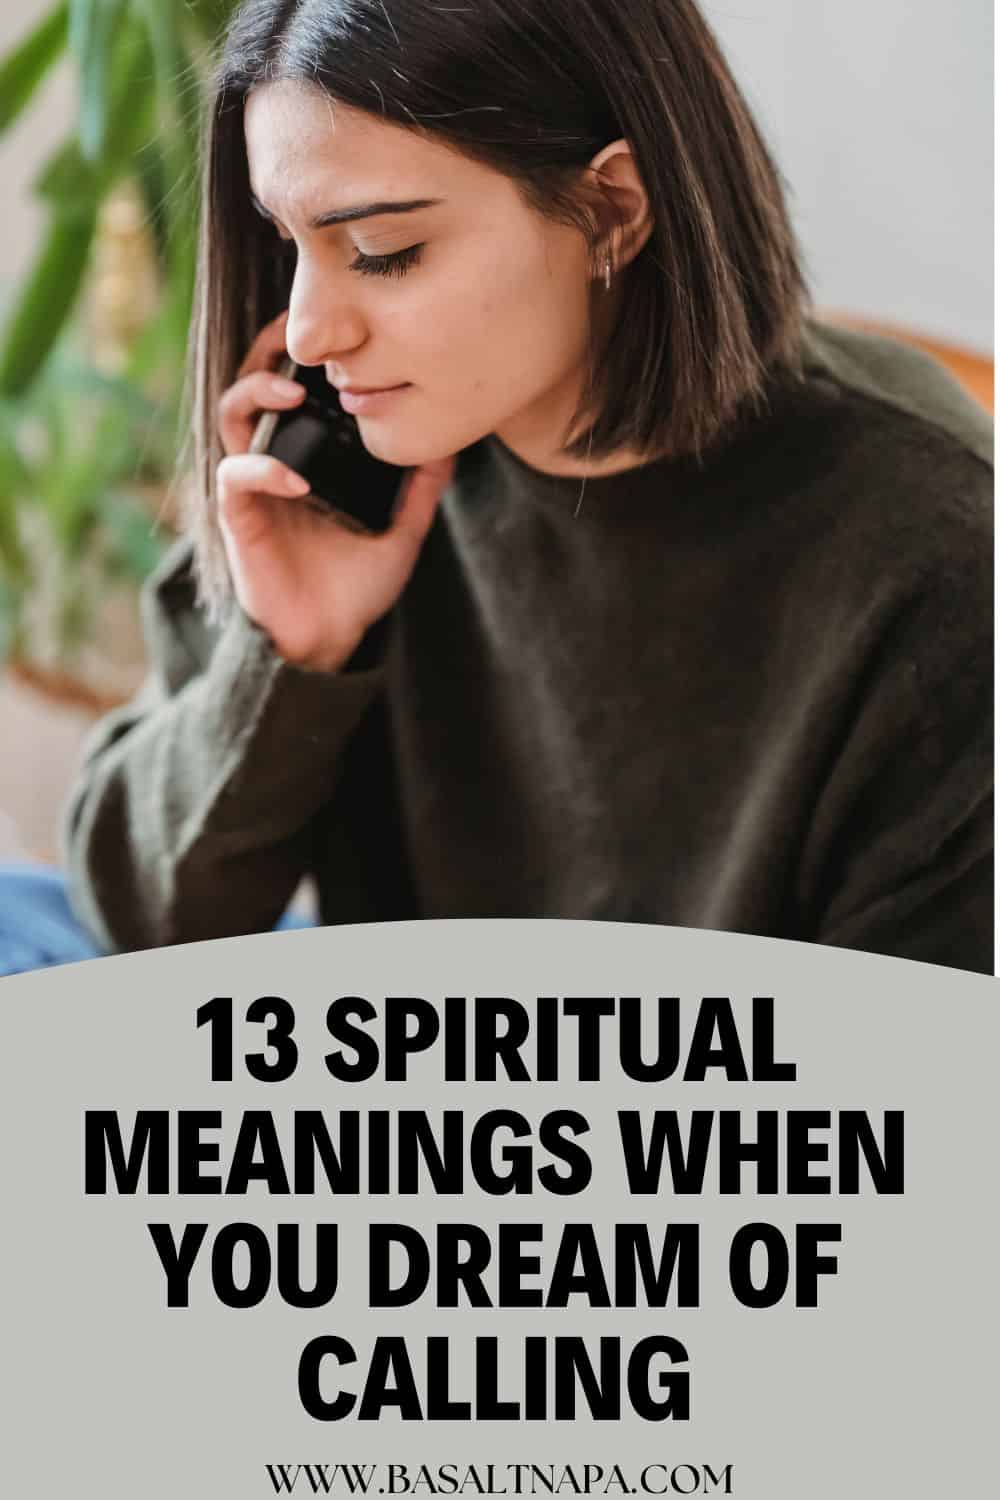 13 Spiritual Meanings When You Dream of Calling